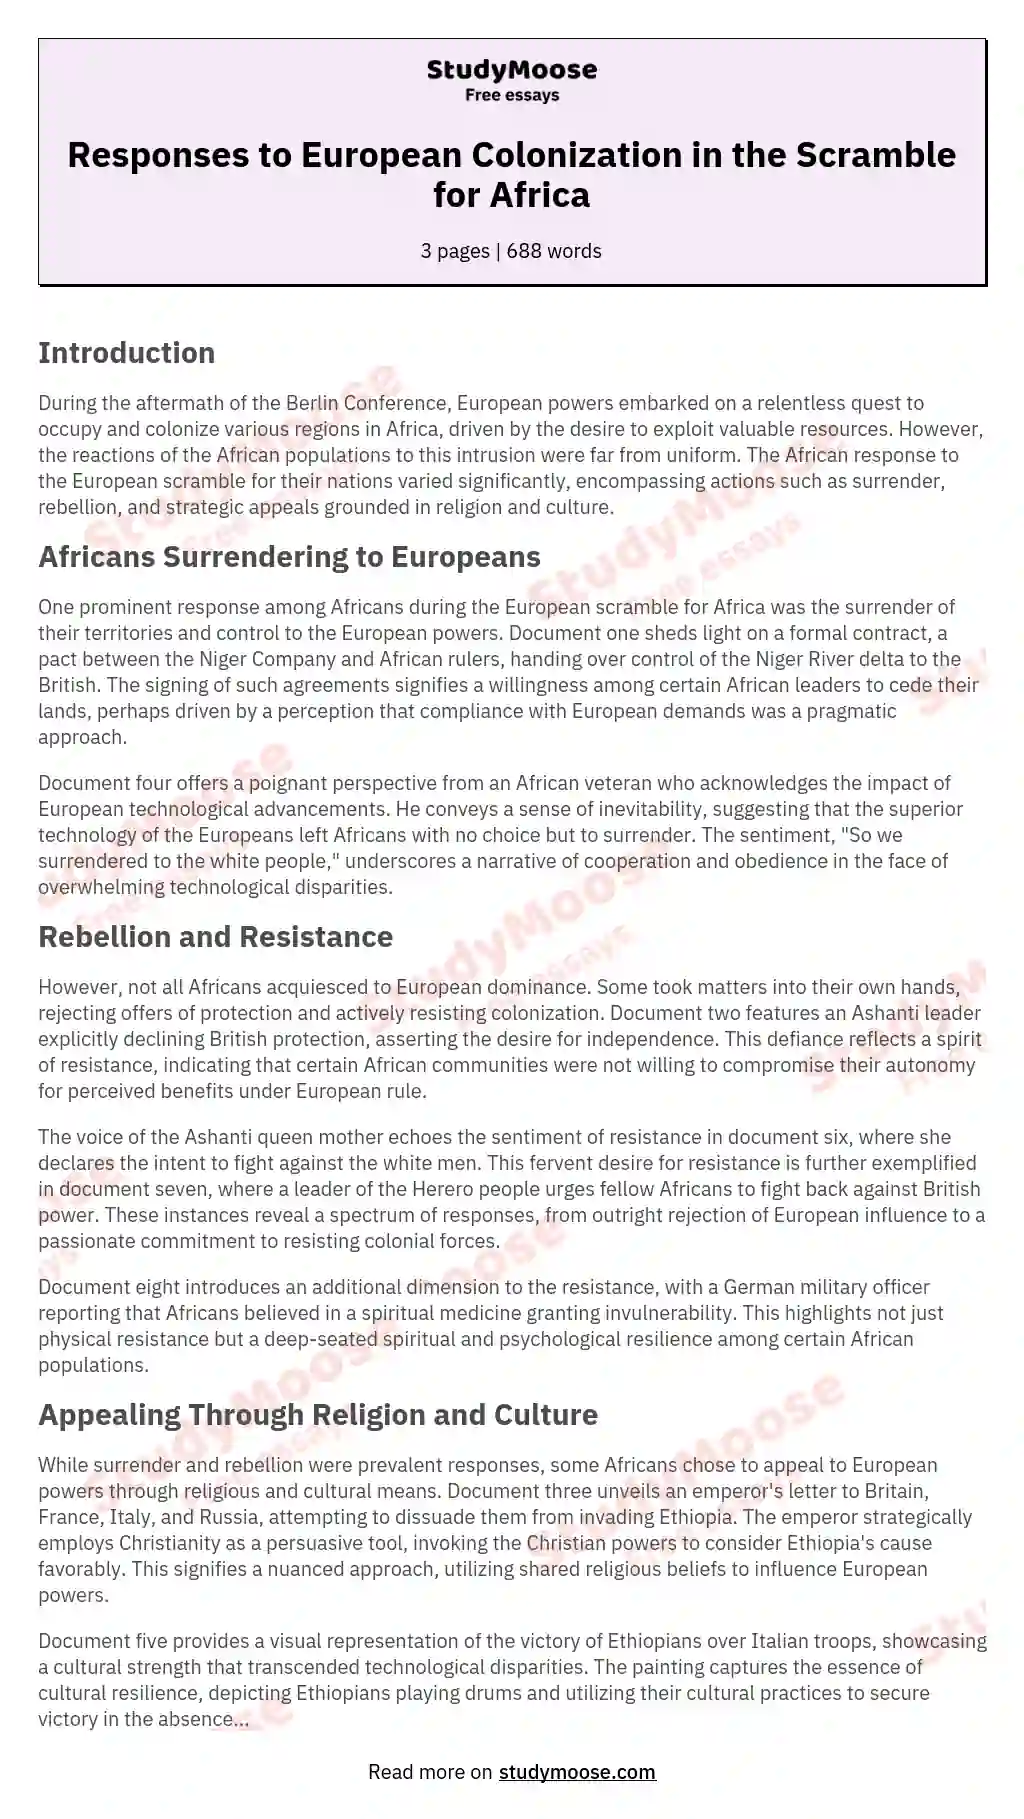 Responses to European Colonization in the Scramble for Africa essay